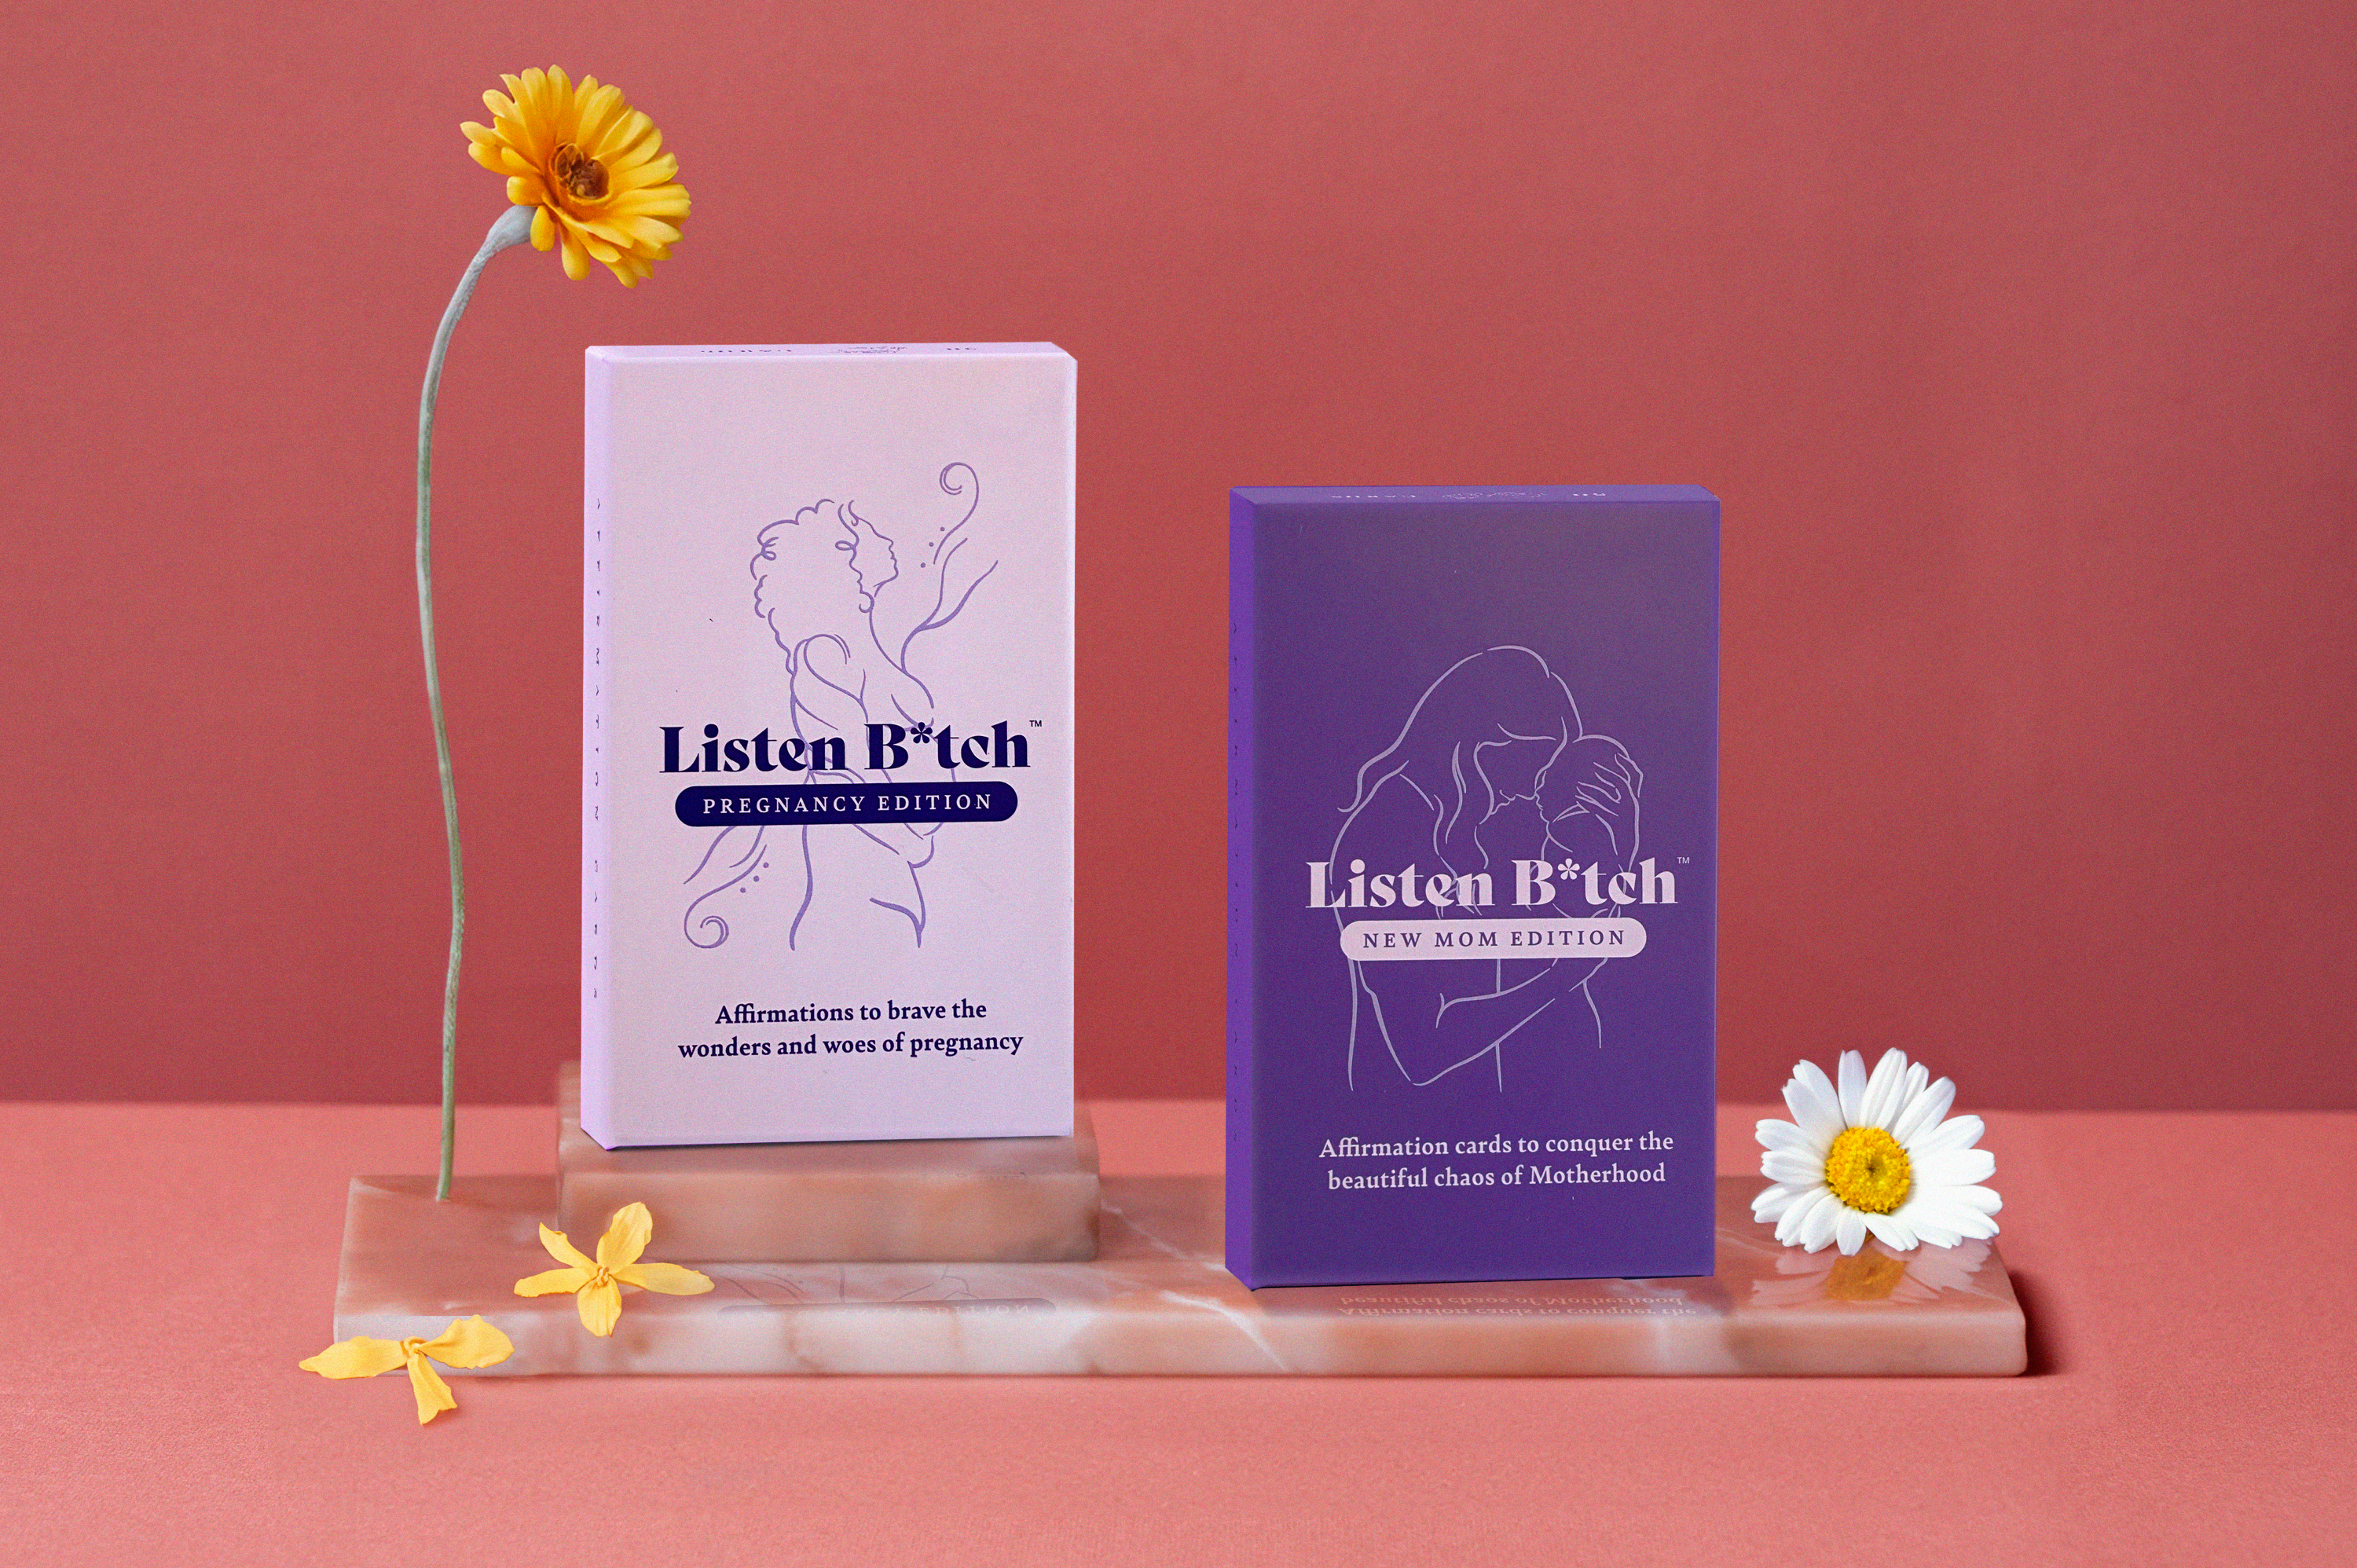 Canadian wellness brand Listen B*tch launched two new affirmation decks to support new moms during this life transition.